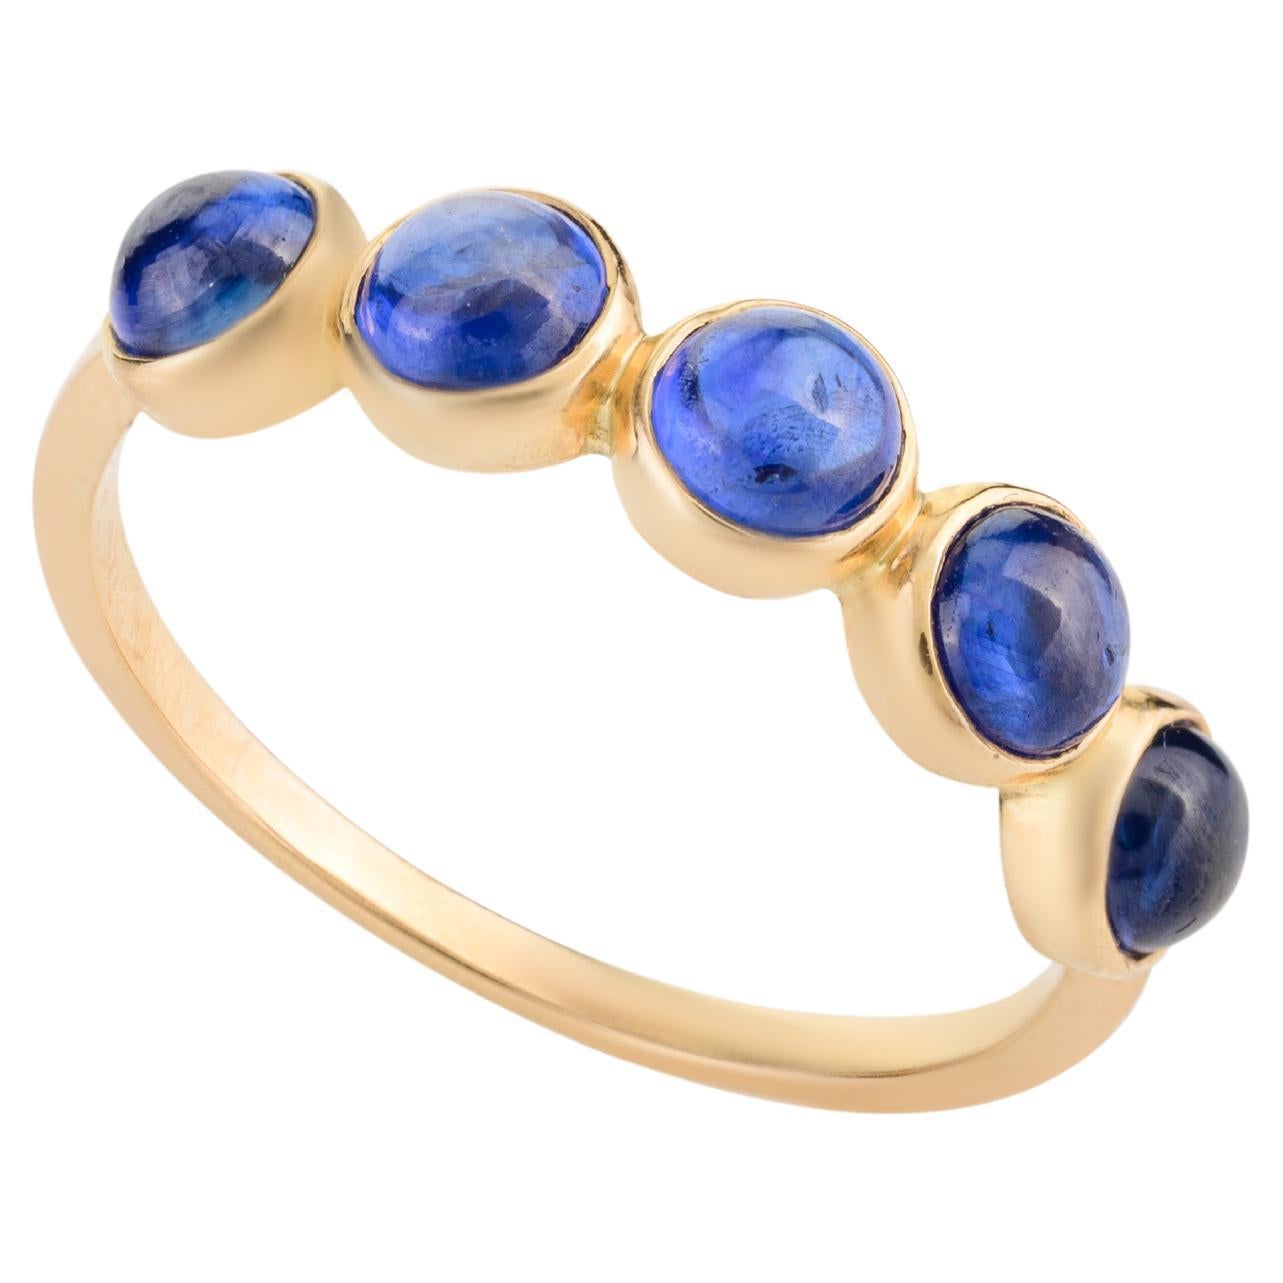 Blue Sapphire Bezel Set Band Stacking Ring in 14k Solid Yellow Gold Gift for Her